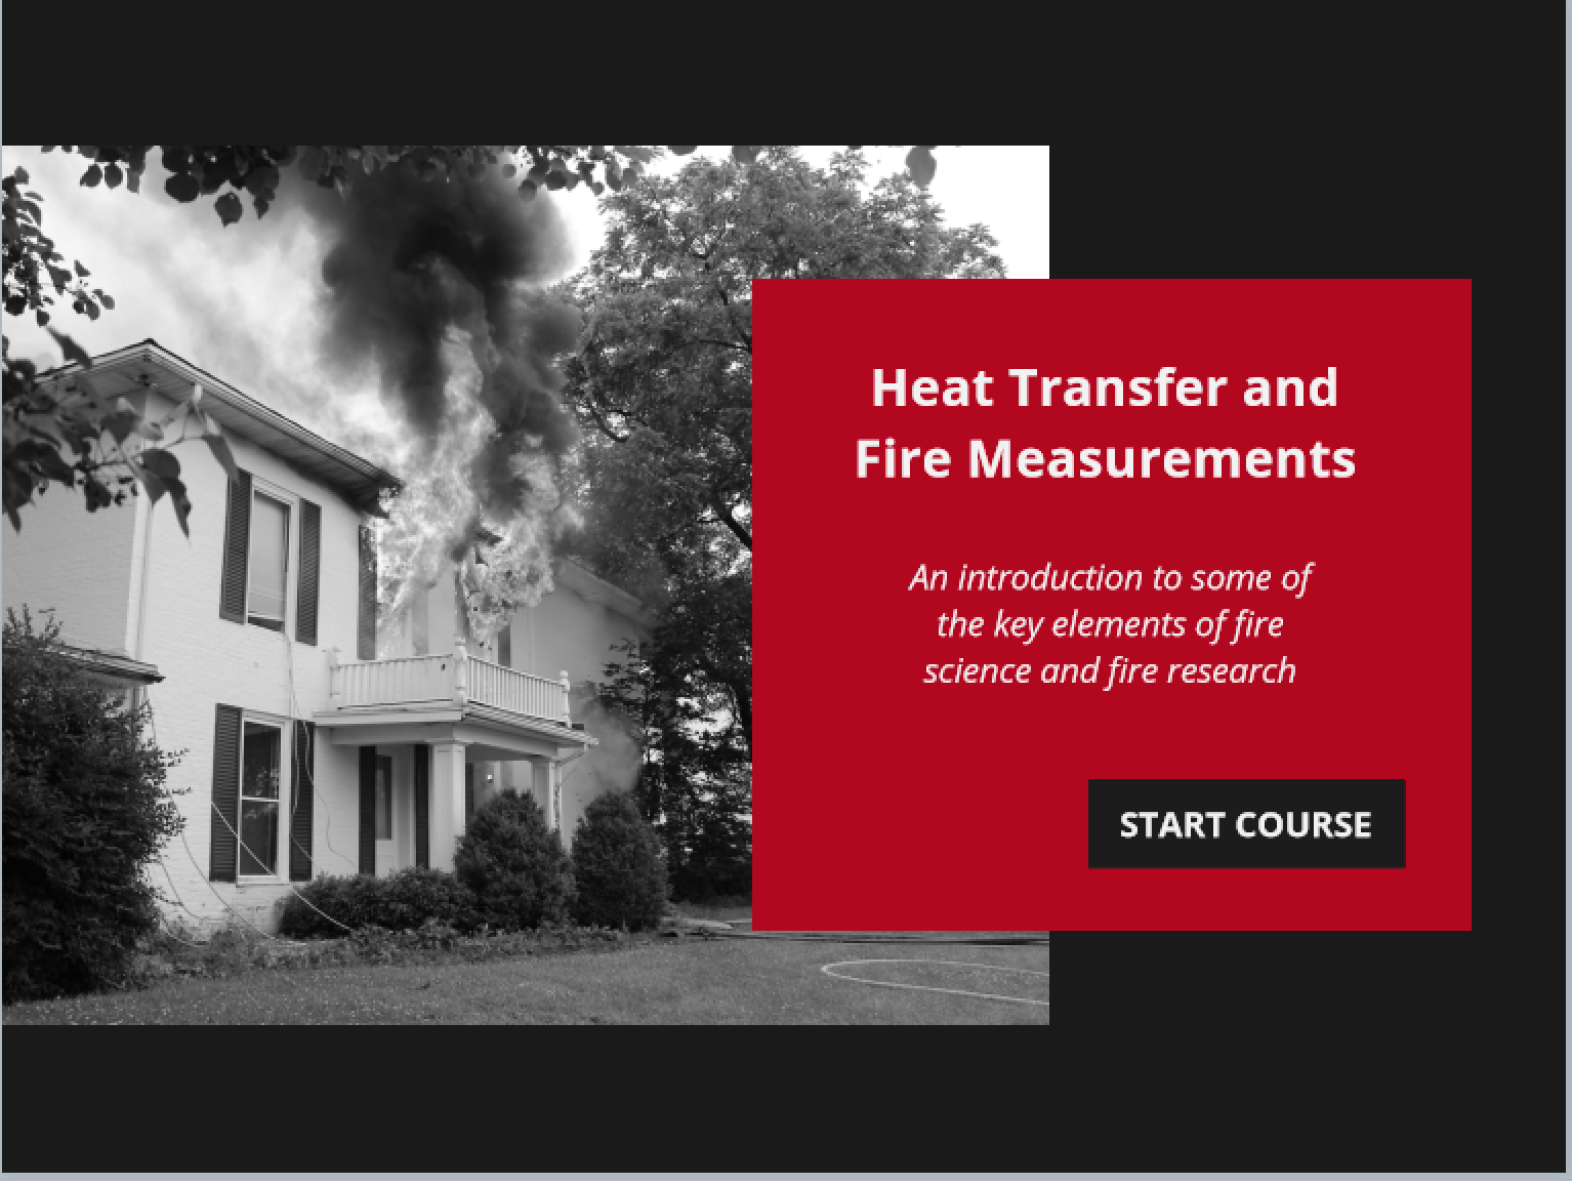 Course title: Introduction to Heat Transfer and Fire Measurements. Photograph of firefighters fighting a house fire.